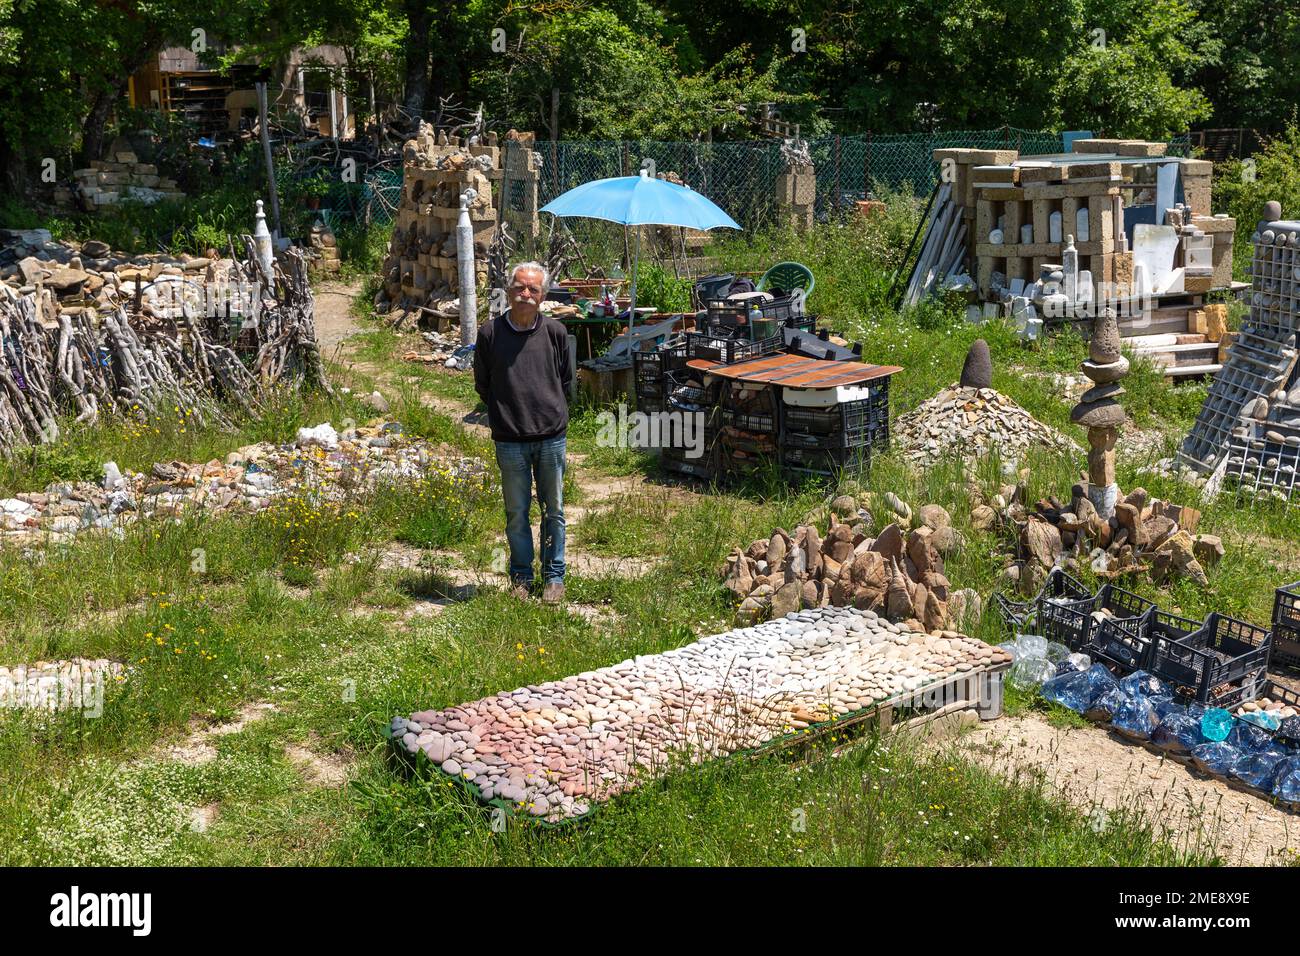 German sculptor Deva Manfred with collection of coloured stones used to create his art in Dreamwoods Park, hidden in the hills of Tuscany, Italy. Stock Photo